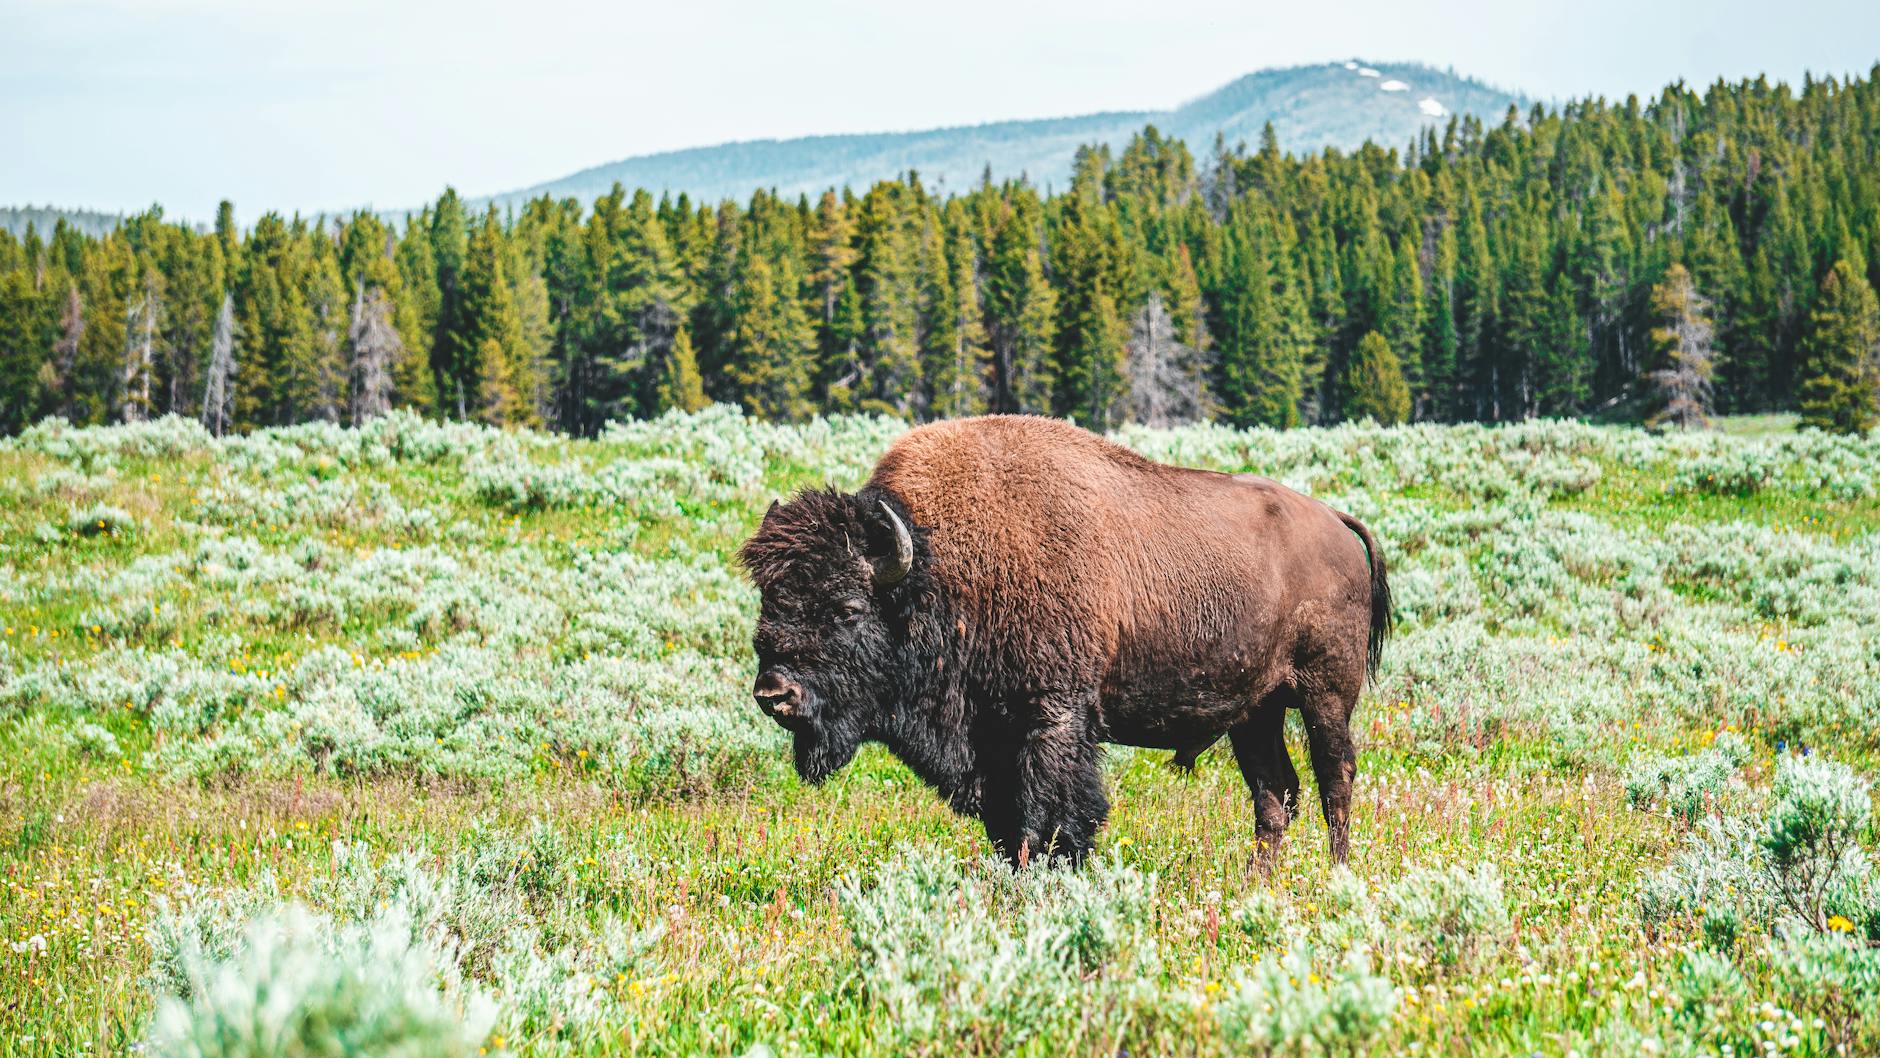 photo of bison on grass field